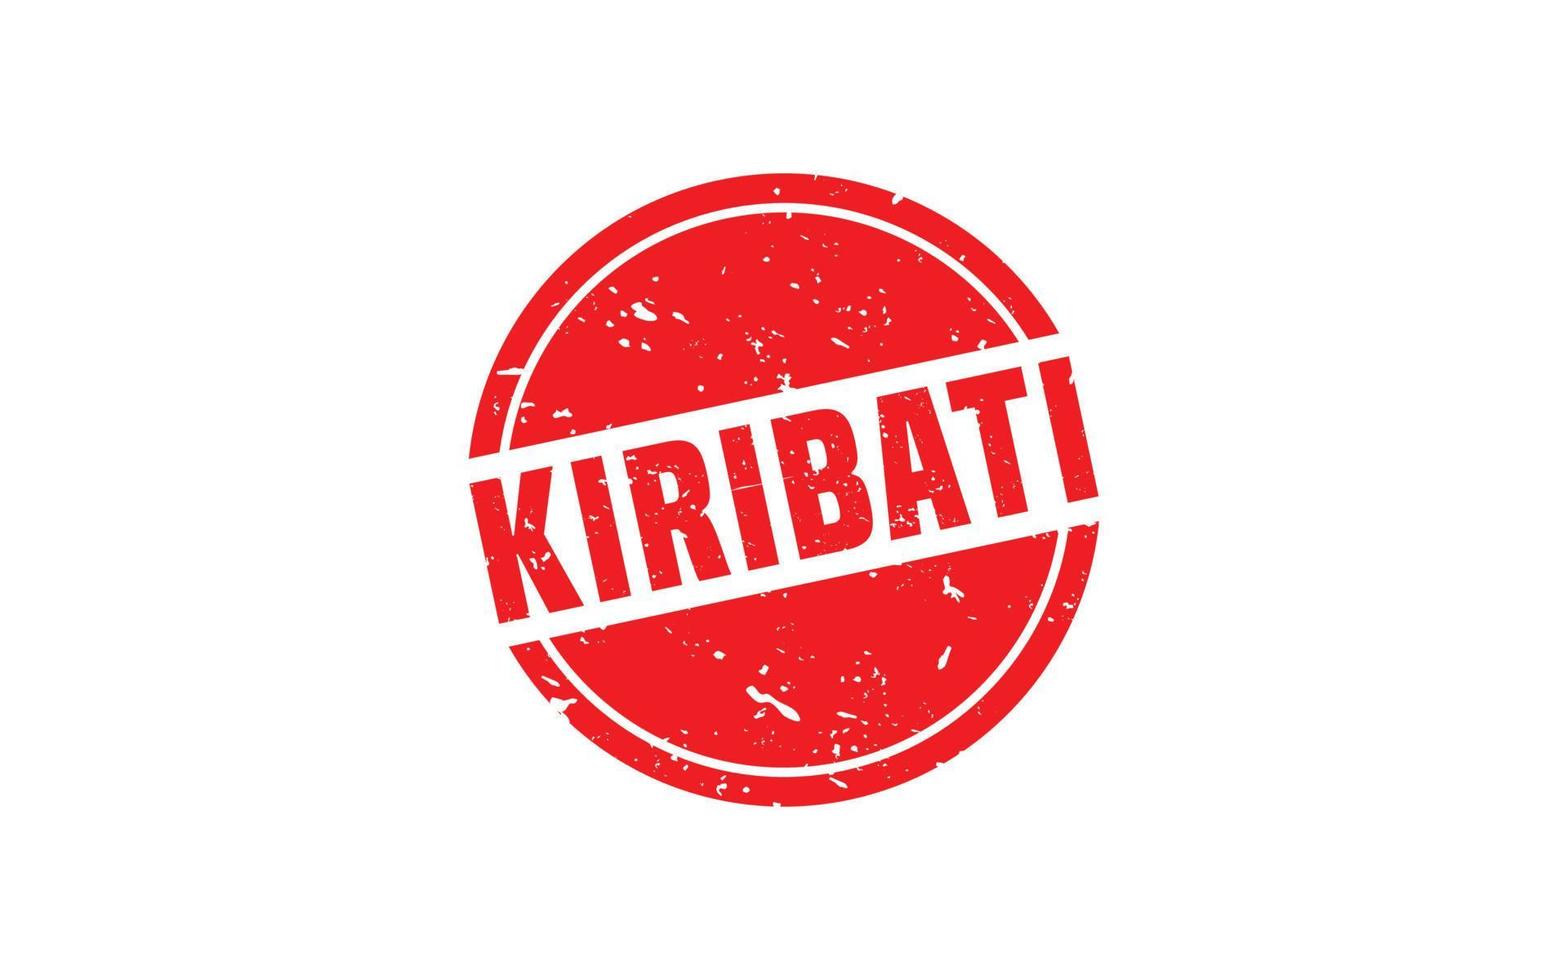 KIRIBATI stamp rubber with grunge style on white background vector